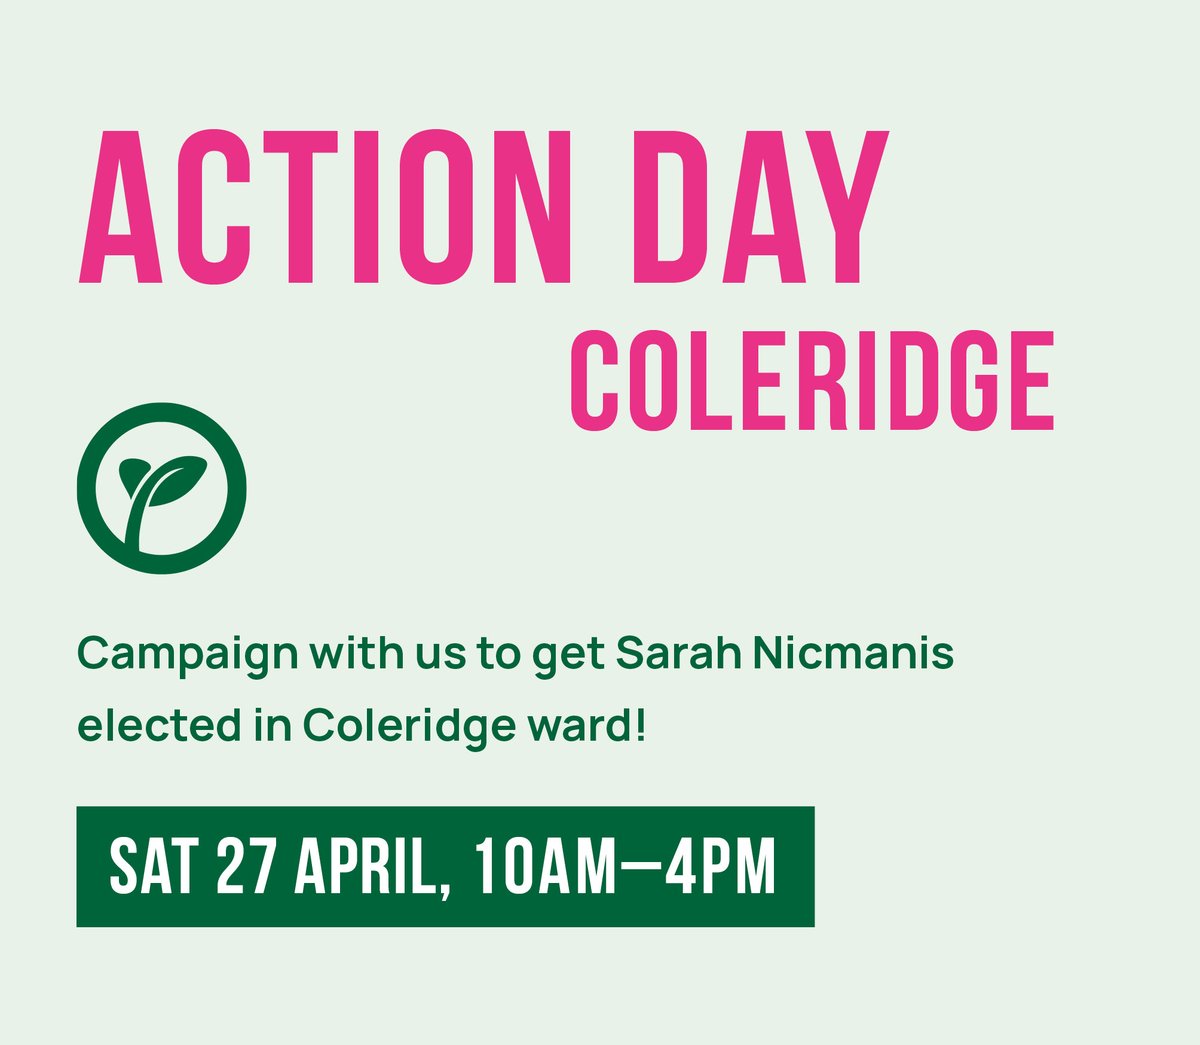 On Saturday, we’re meeting at 344 Cherry Hinton Road and talking to residents in Coleridge. The schedule of the day will be as follows: 10:00–12:30 Campaigning 13:00–14:00 Lunch 14:00–16:00 Campaigning Join us for all or part of the day if you can 💚